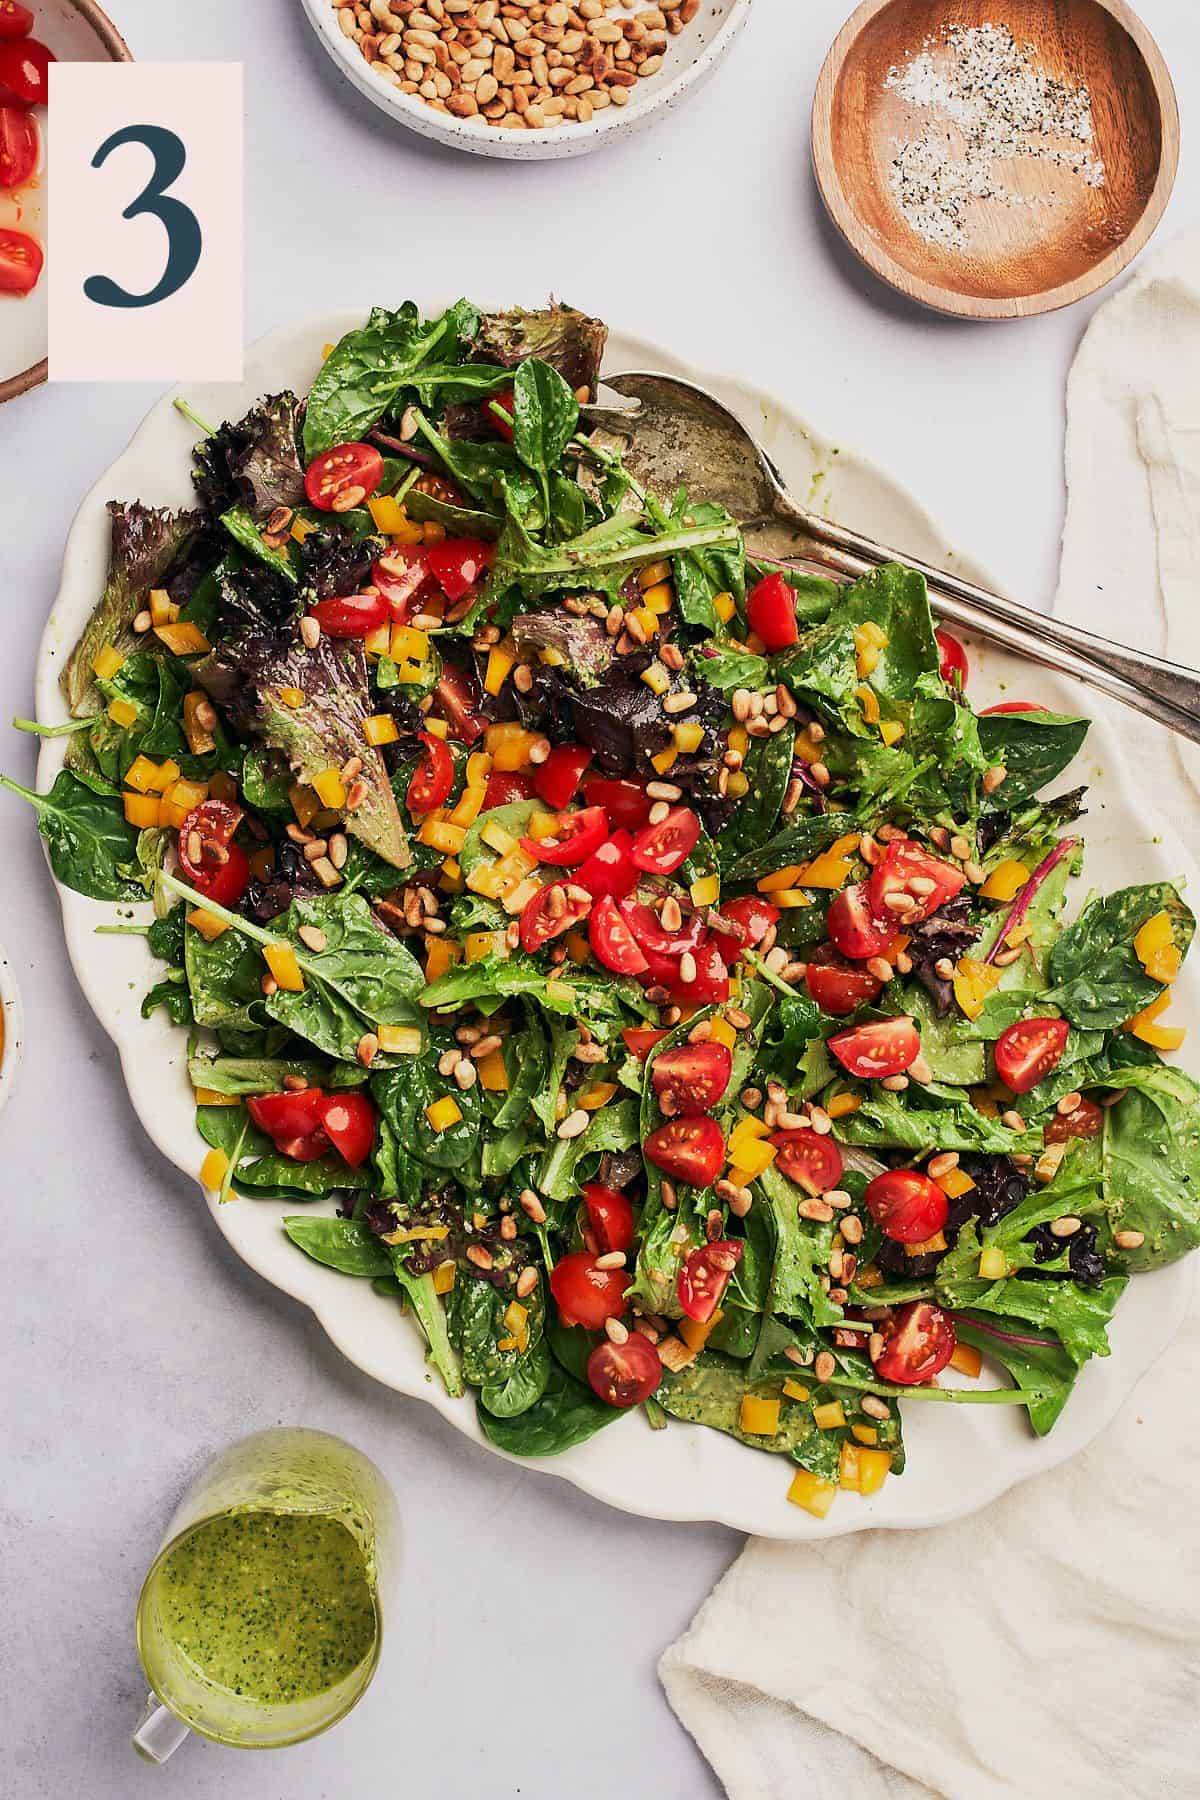 leafy greens topped with fresh chopped tomatoes, yellow bell pepper, and pine nuts.